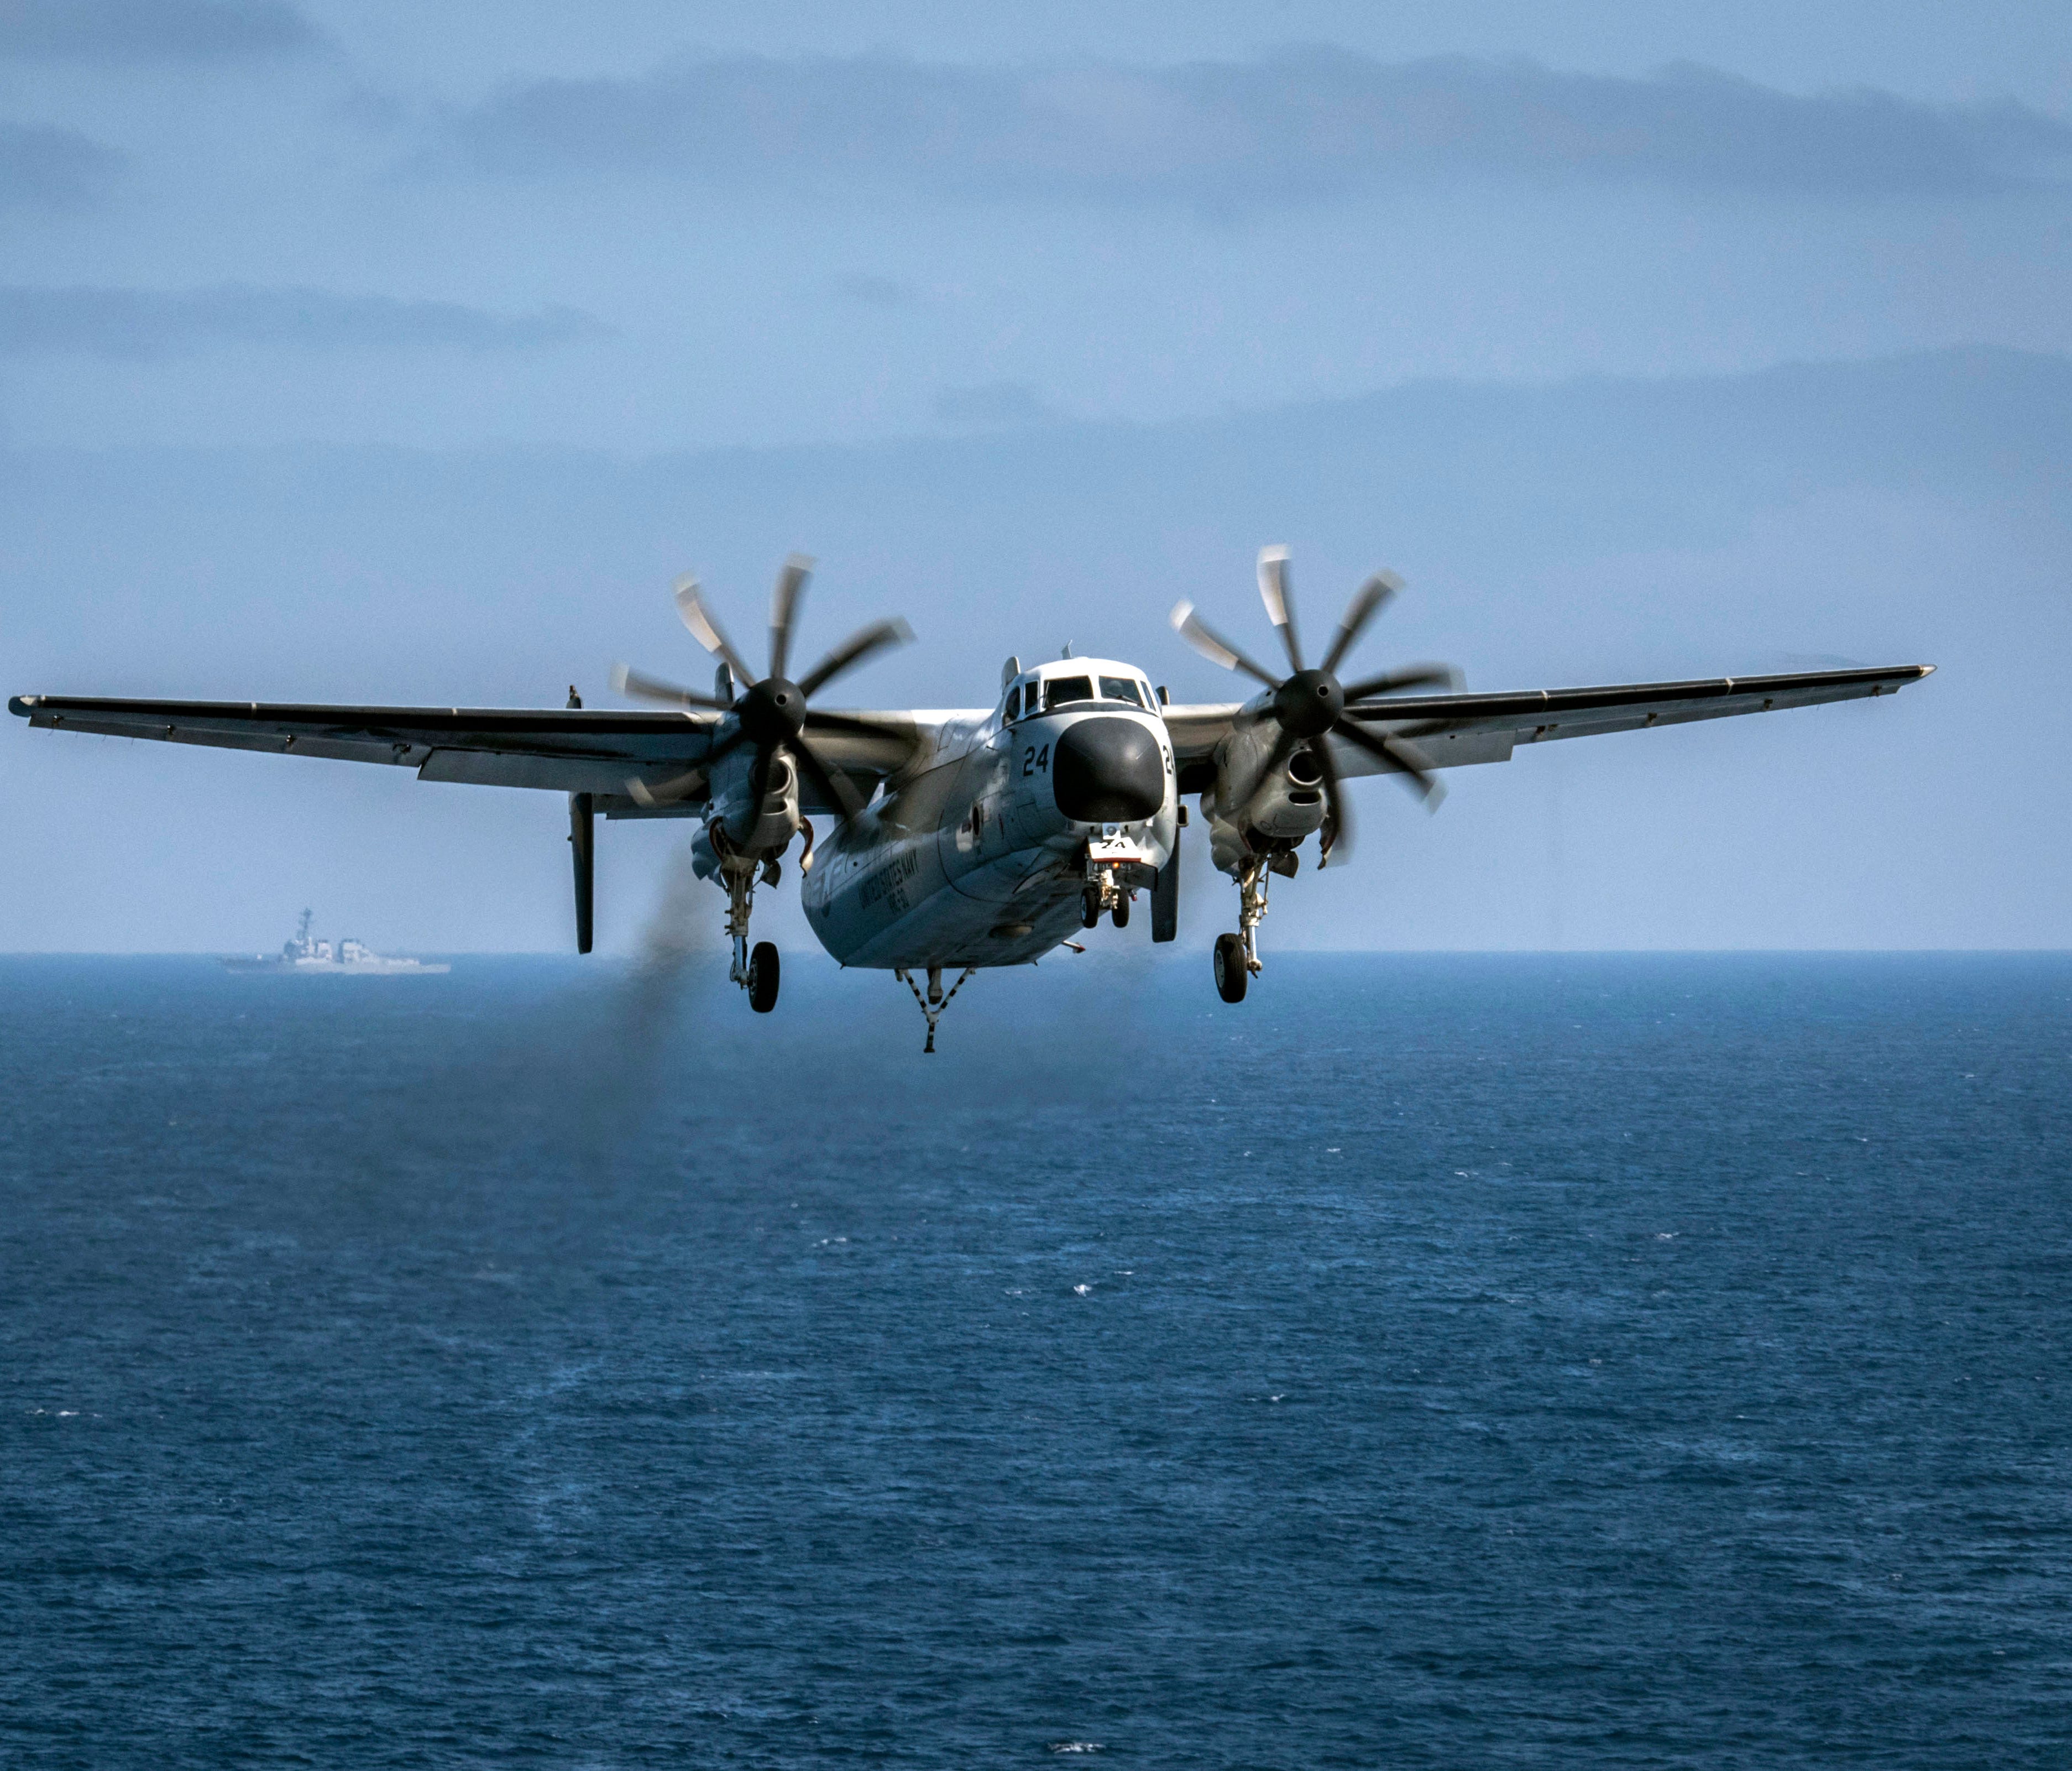 In this image provided by the U.S. Navy, a C-2A Greyhound assigned to the Providers of Fleet Logistics Support Squadron (VRC) 30, prepares to land on the flight deck aboard the aircraft carrier USS Theodore Roosevelt (CVN 71) on Aug. 22, 2017. The se